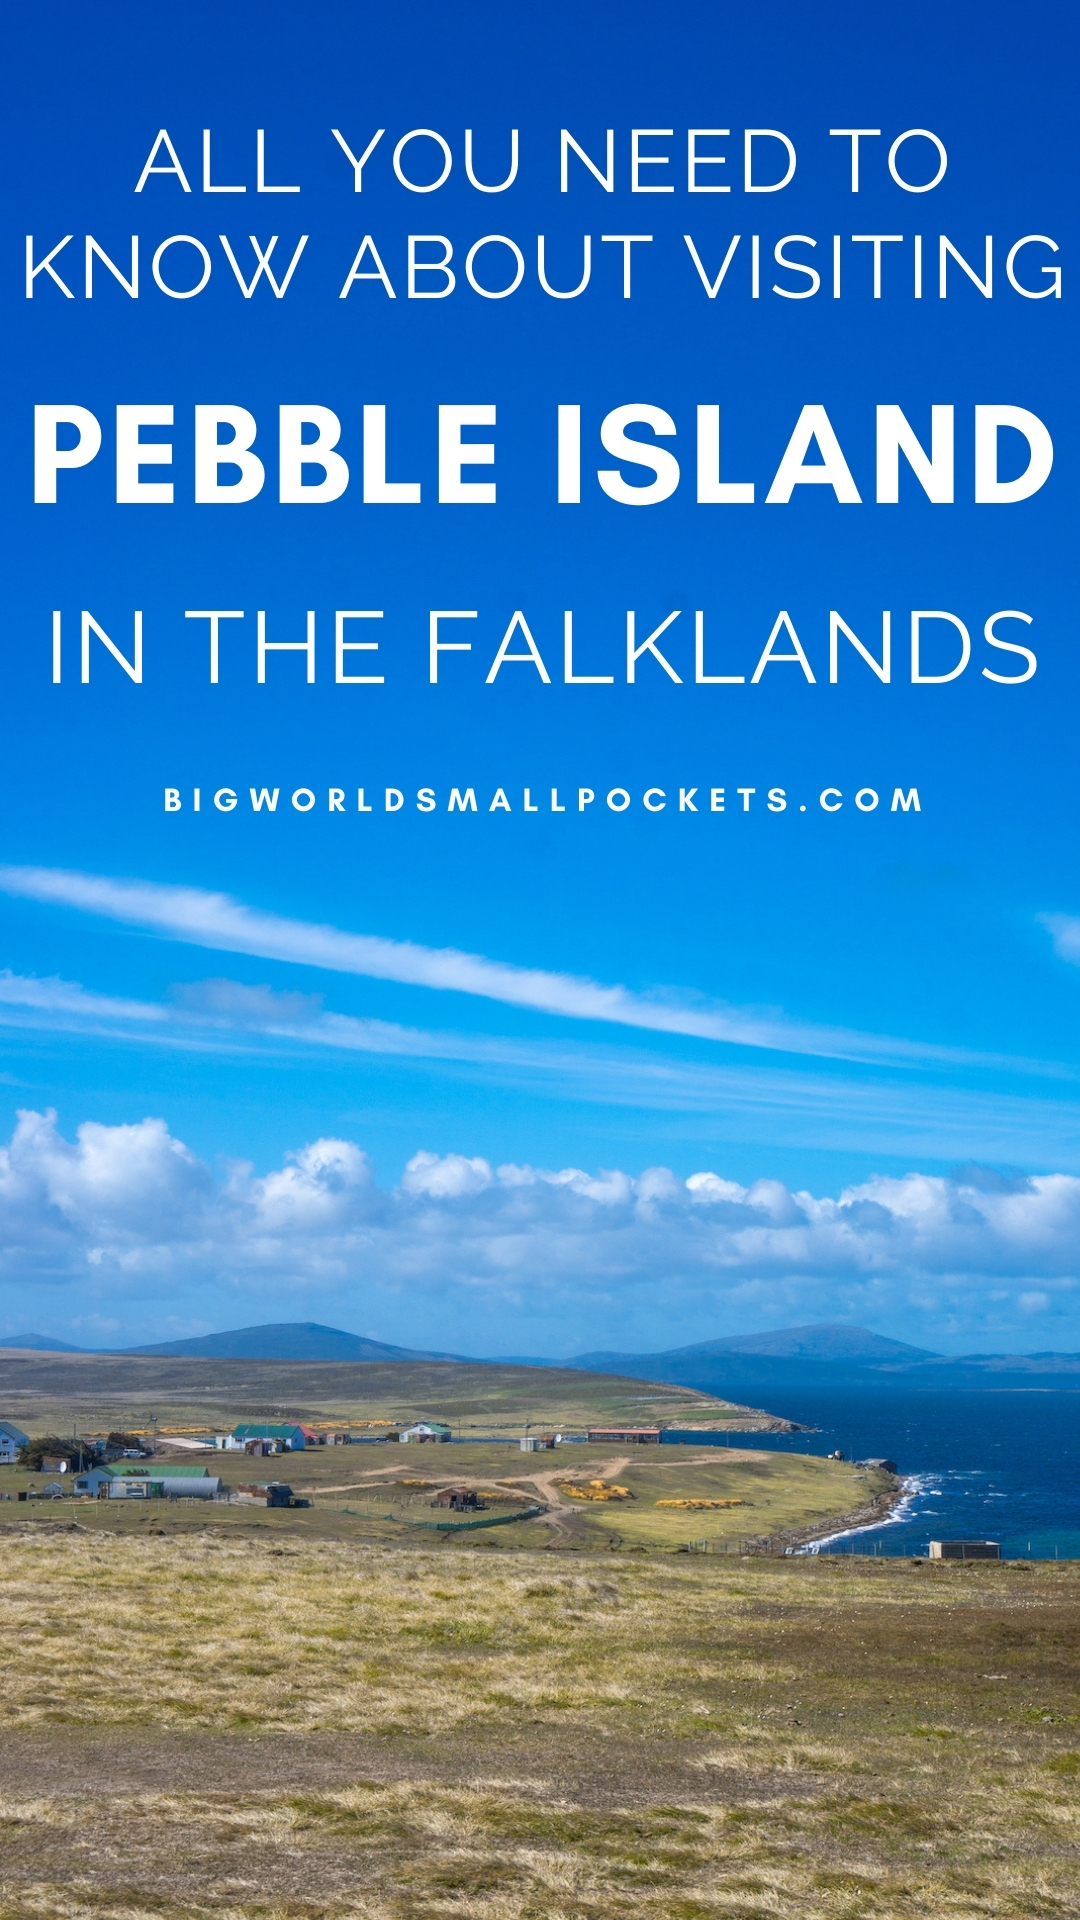 All You Need to Know About Visiting Pebble Island, in the Falklands